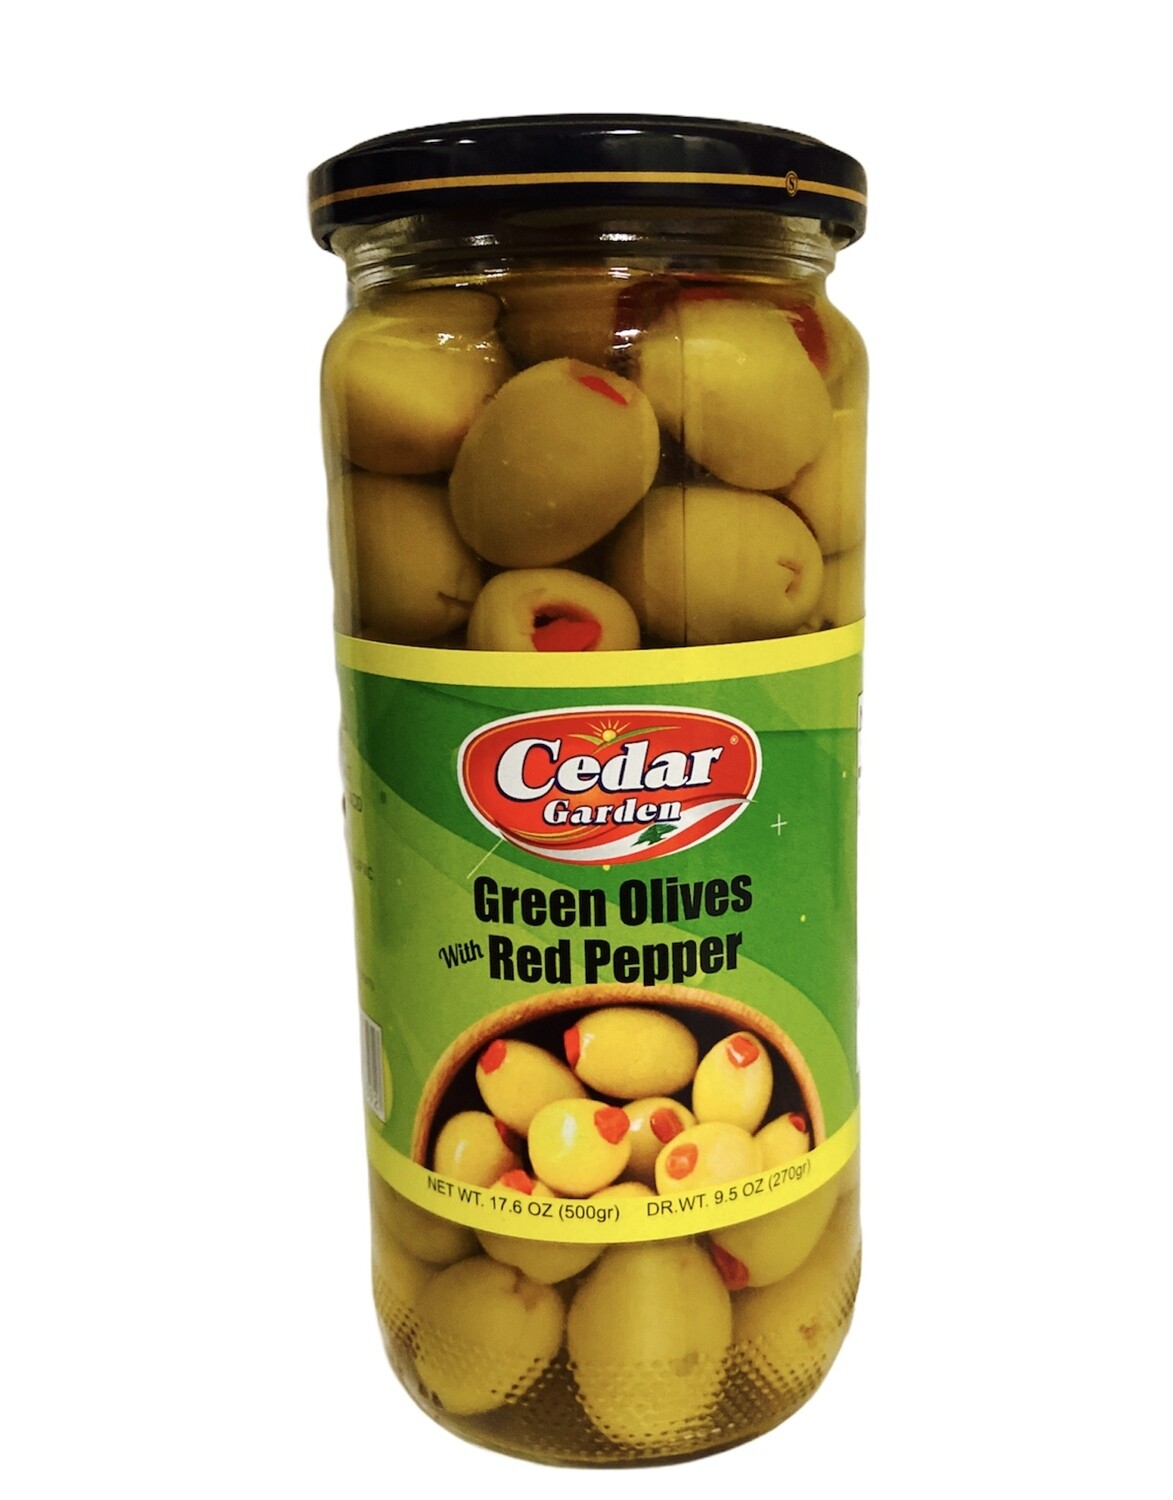 Cedar Garden Green Olives With Red Peppers